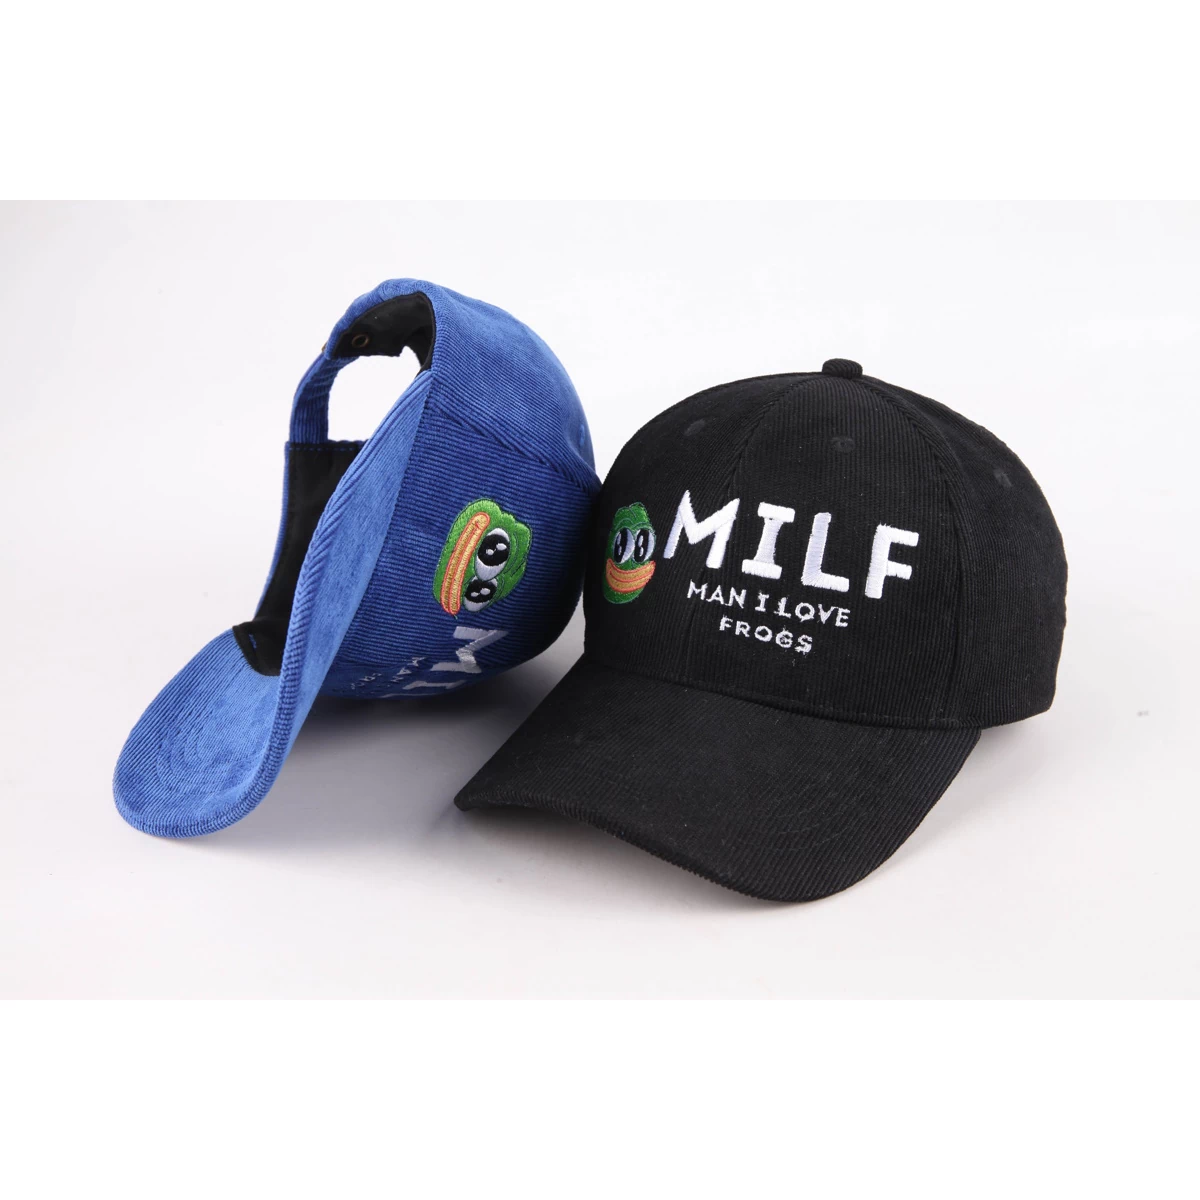 MILF Man I Love Frogs, Embroidered Dad Hat, Funny Frog Hat, Frog Lover Hat, Funny Slogan Hat, MILF Hat